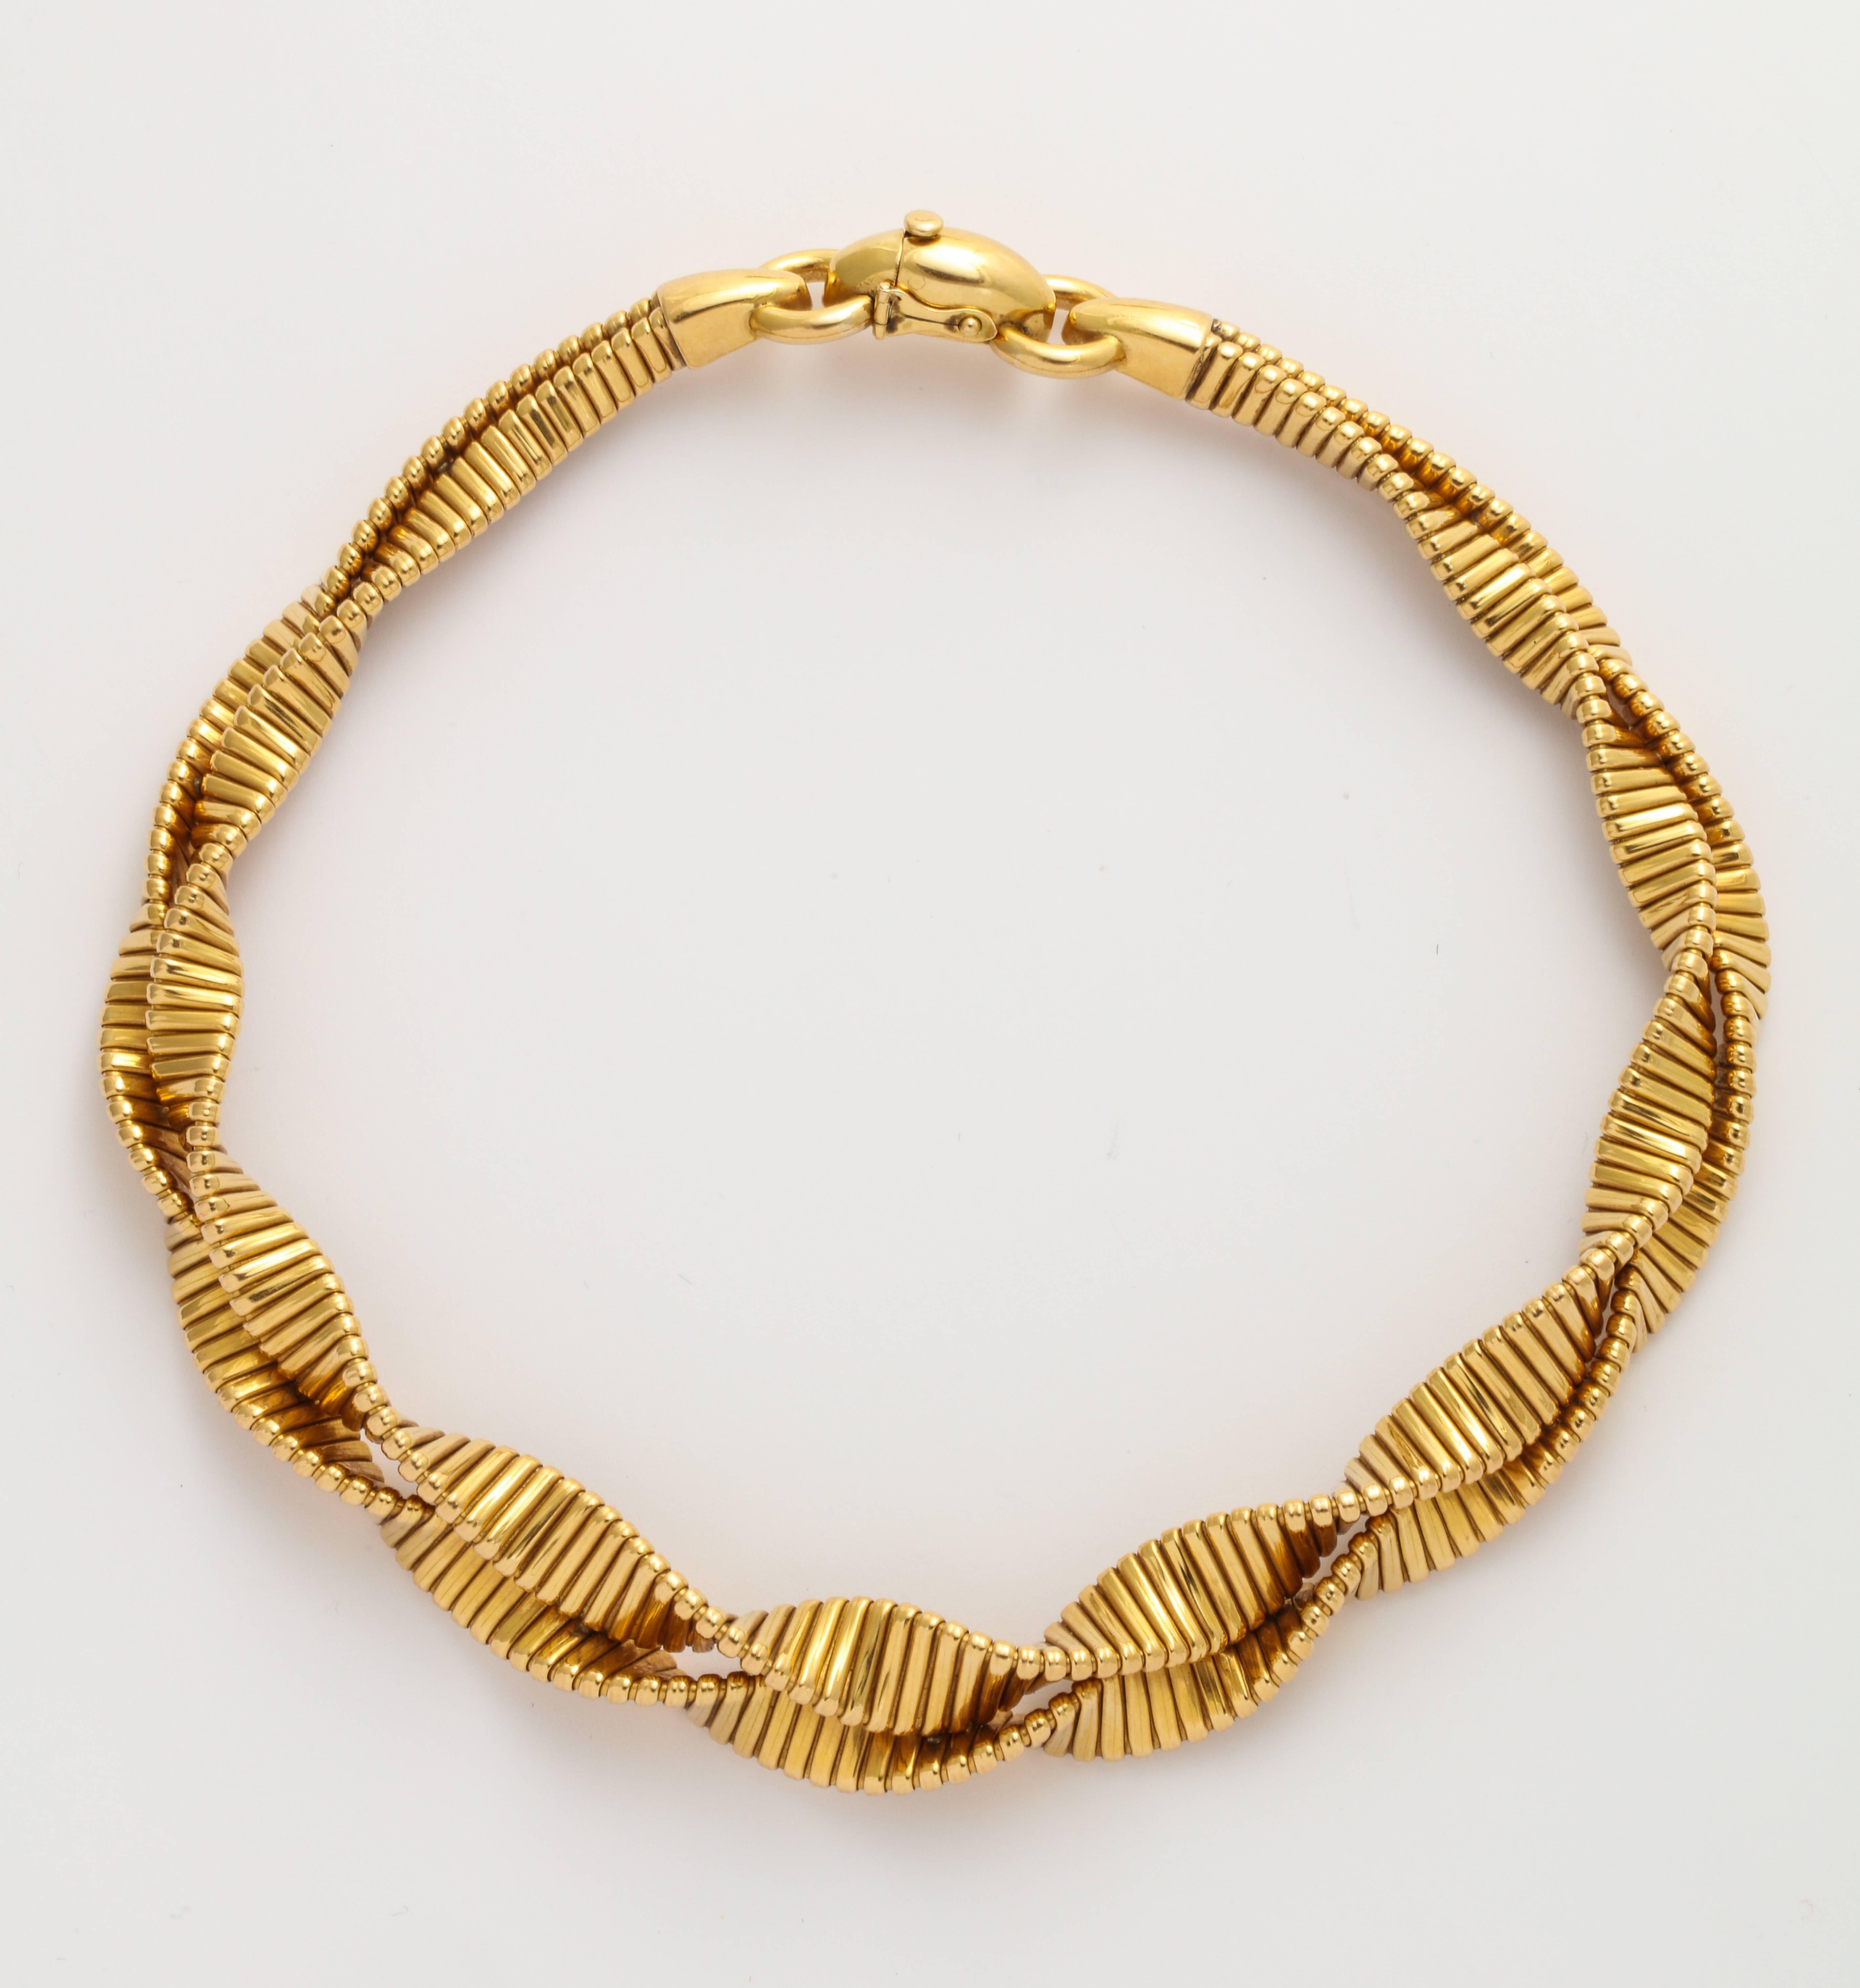 An elegant 1930s French Retro necklace and bracelet of 18K gold, in a flexible handcrafted spiral of flattened tube-gas with a beaded edge look. Each clearly marked by the maker RT and French 18K gold marks. The double wide necklace measures 3/4 in.